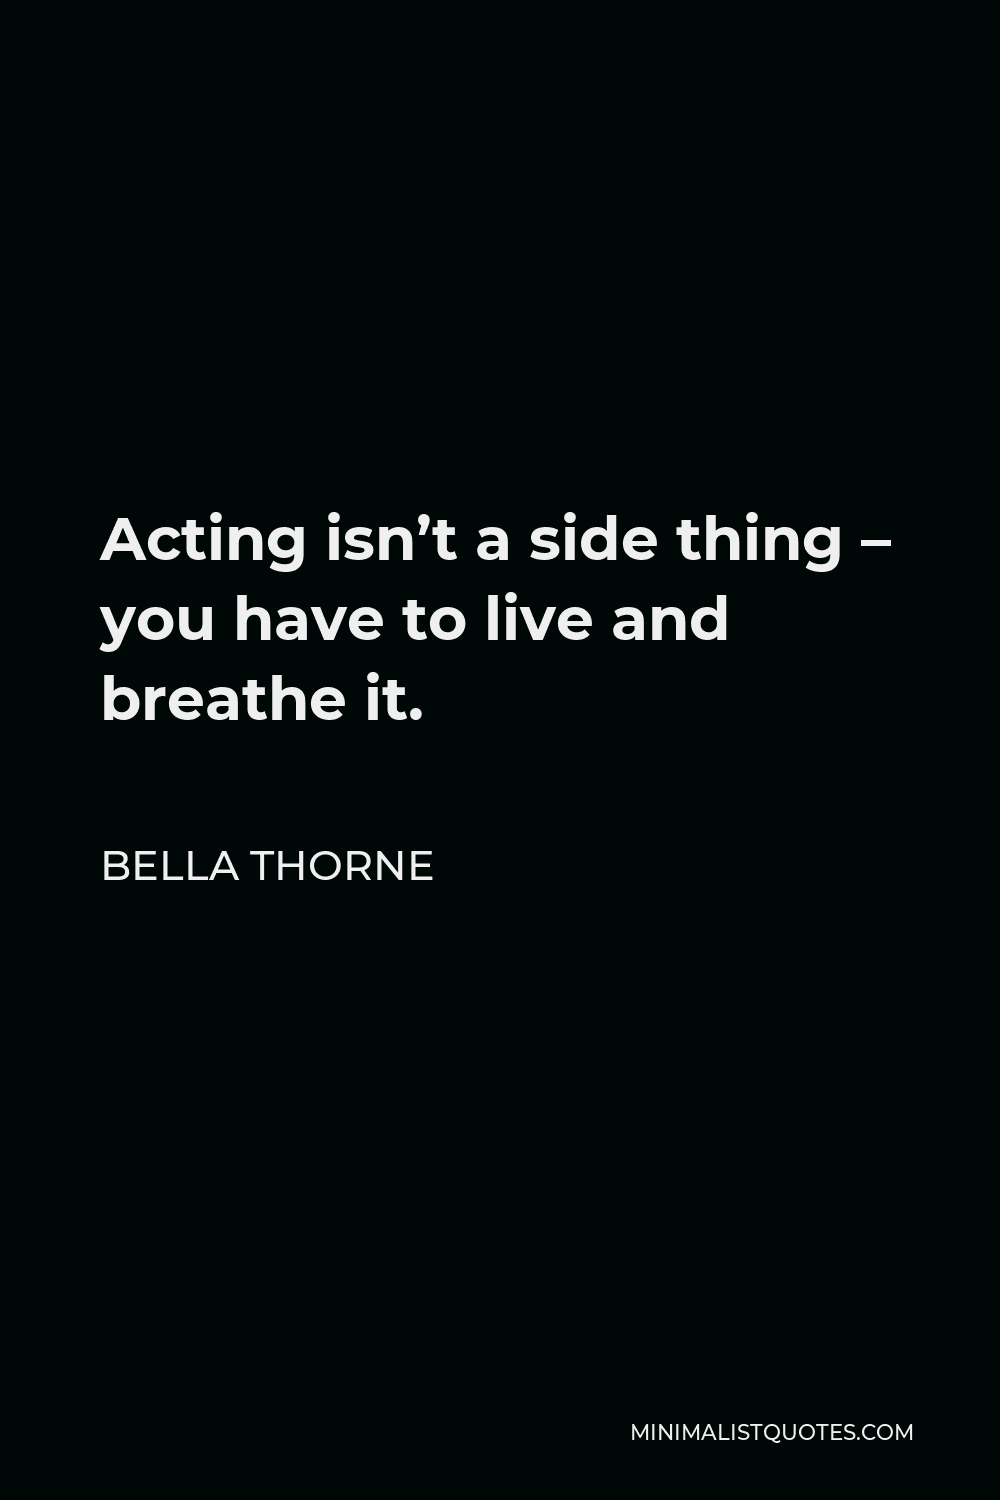 Bella Thorne Quote - Acting isn’t a side thing – you have to live and breathe it.